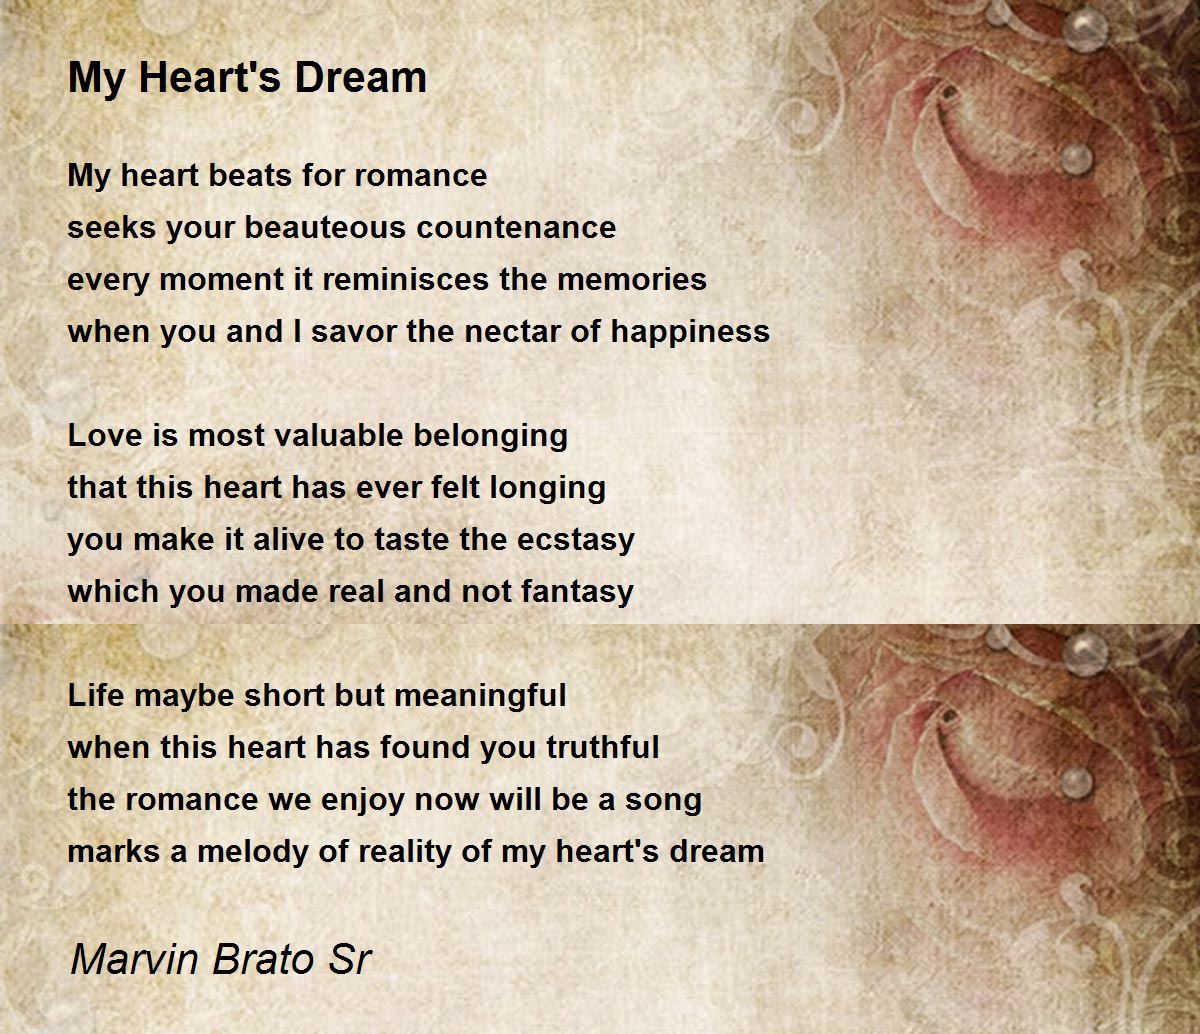 Enjoy The Moment' - ' Enjoy The Moment' Poem by Marvin Brato Sr